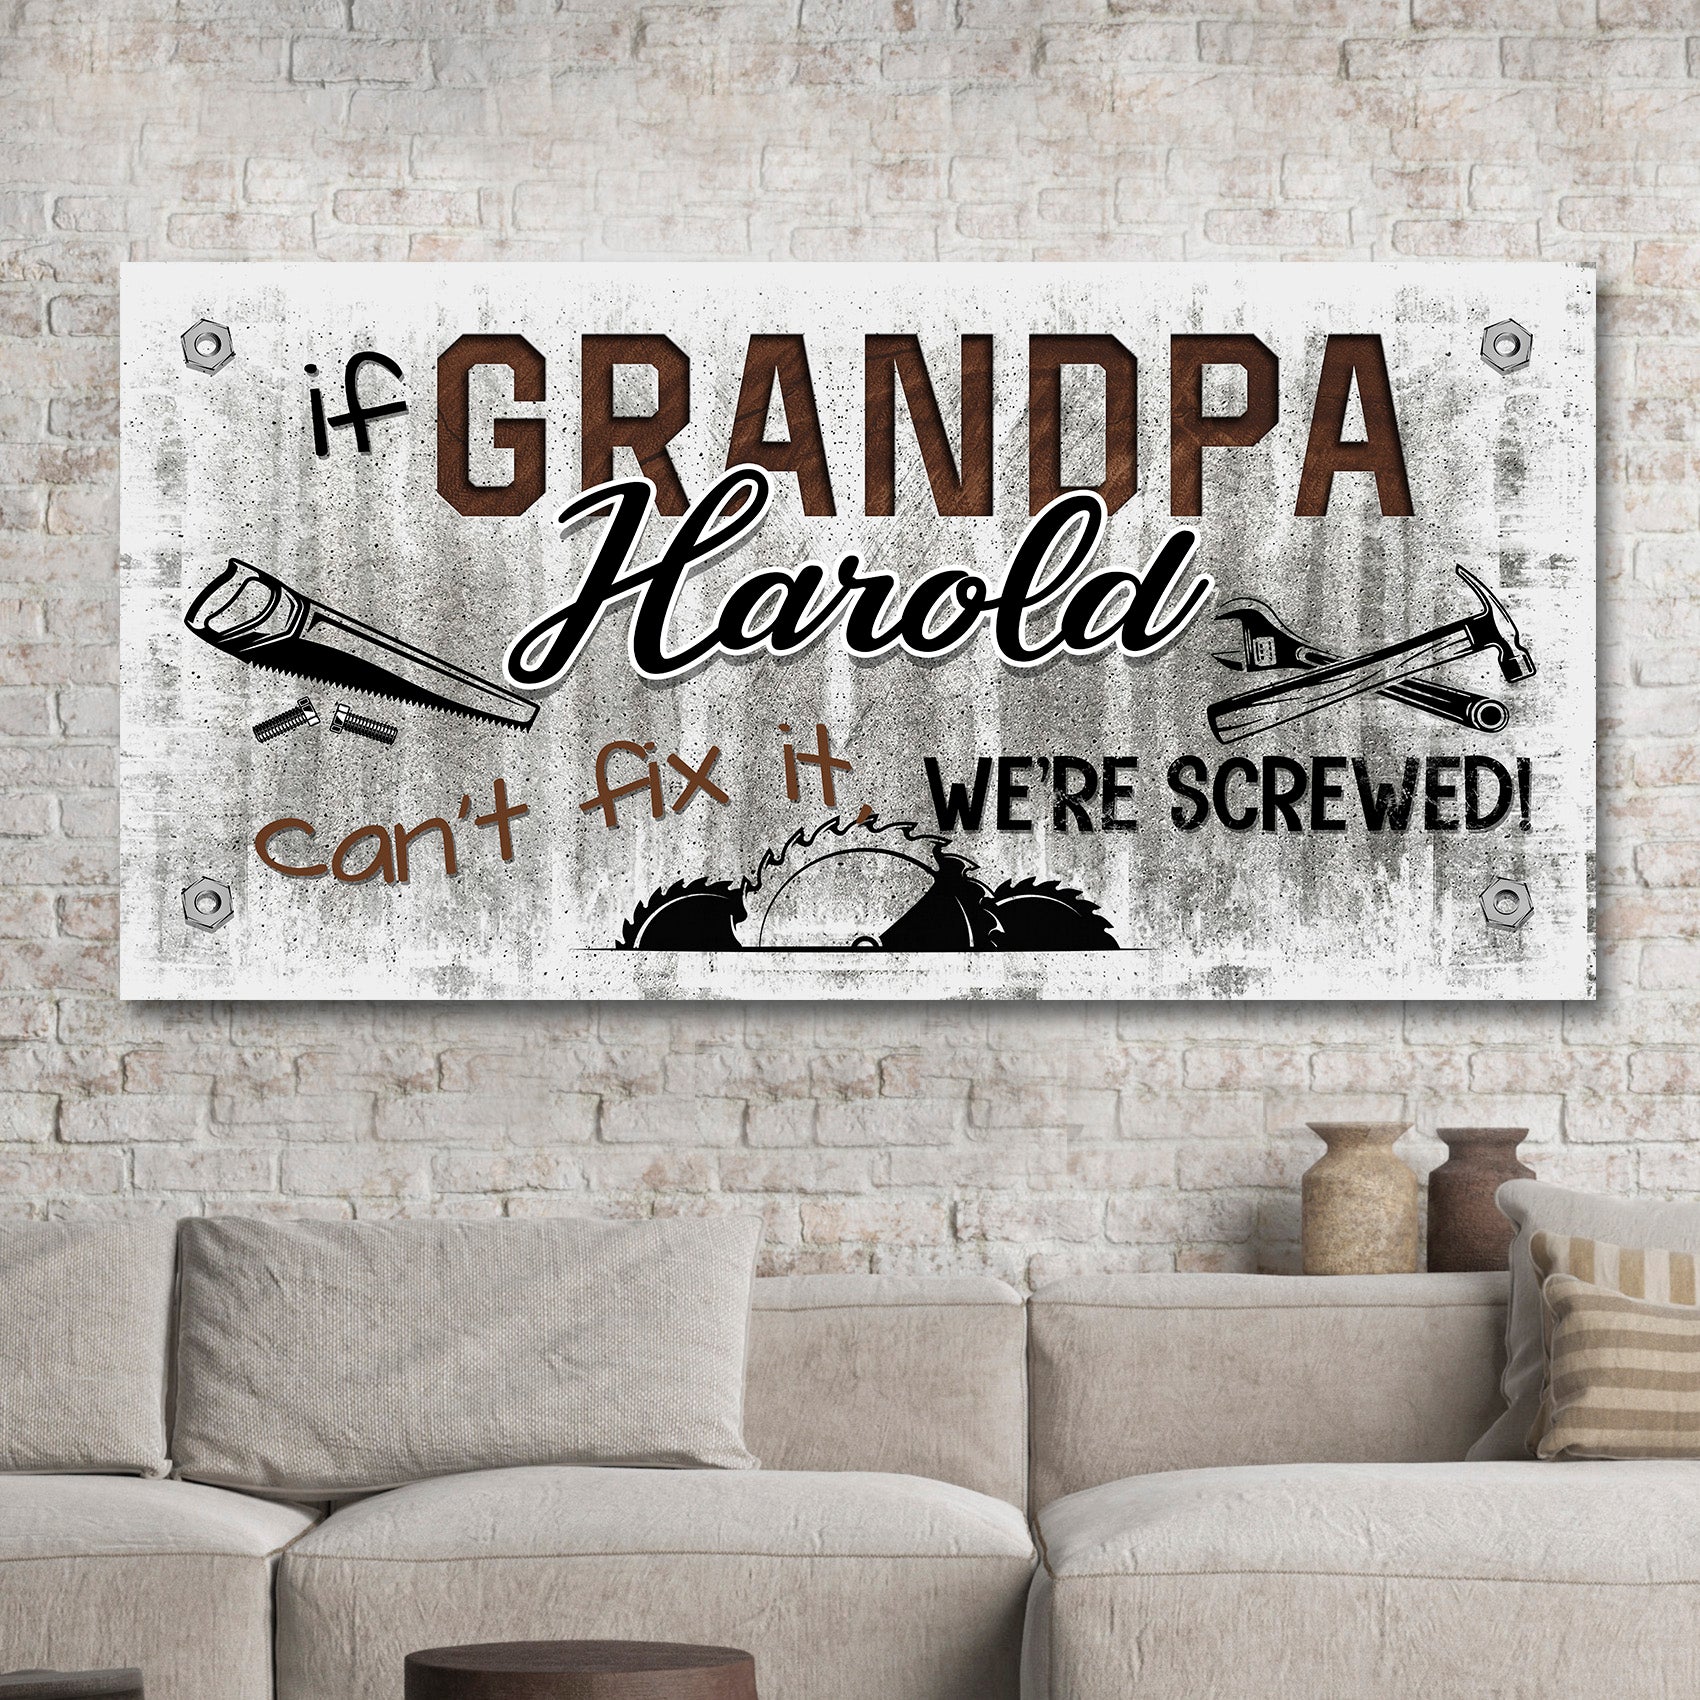 Grandpa Workshop Sign Style 2 - Image by Tailored Canvases